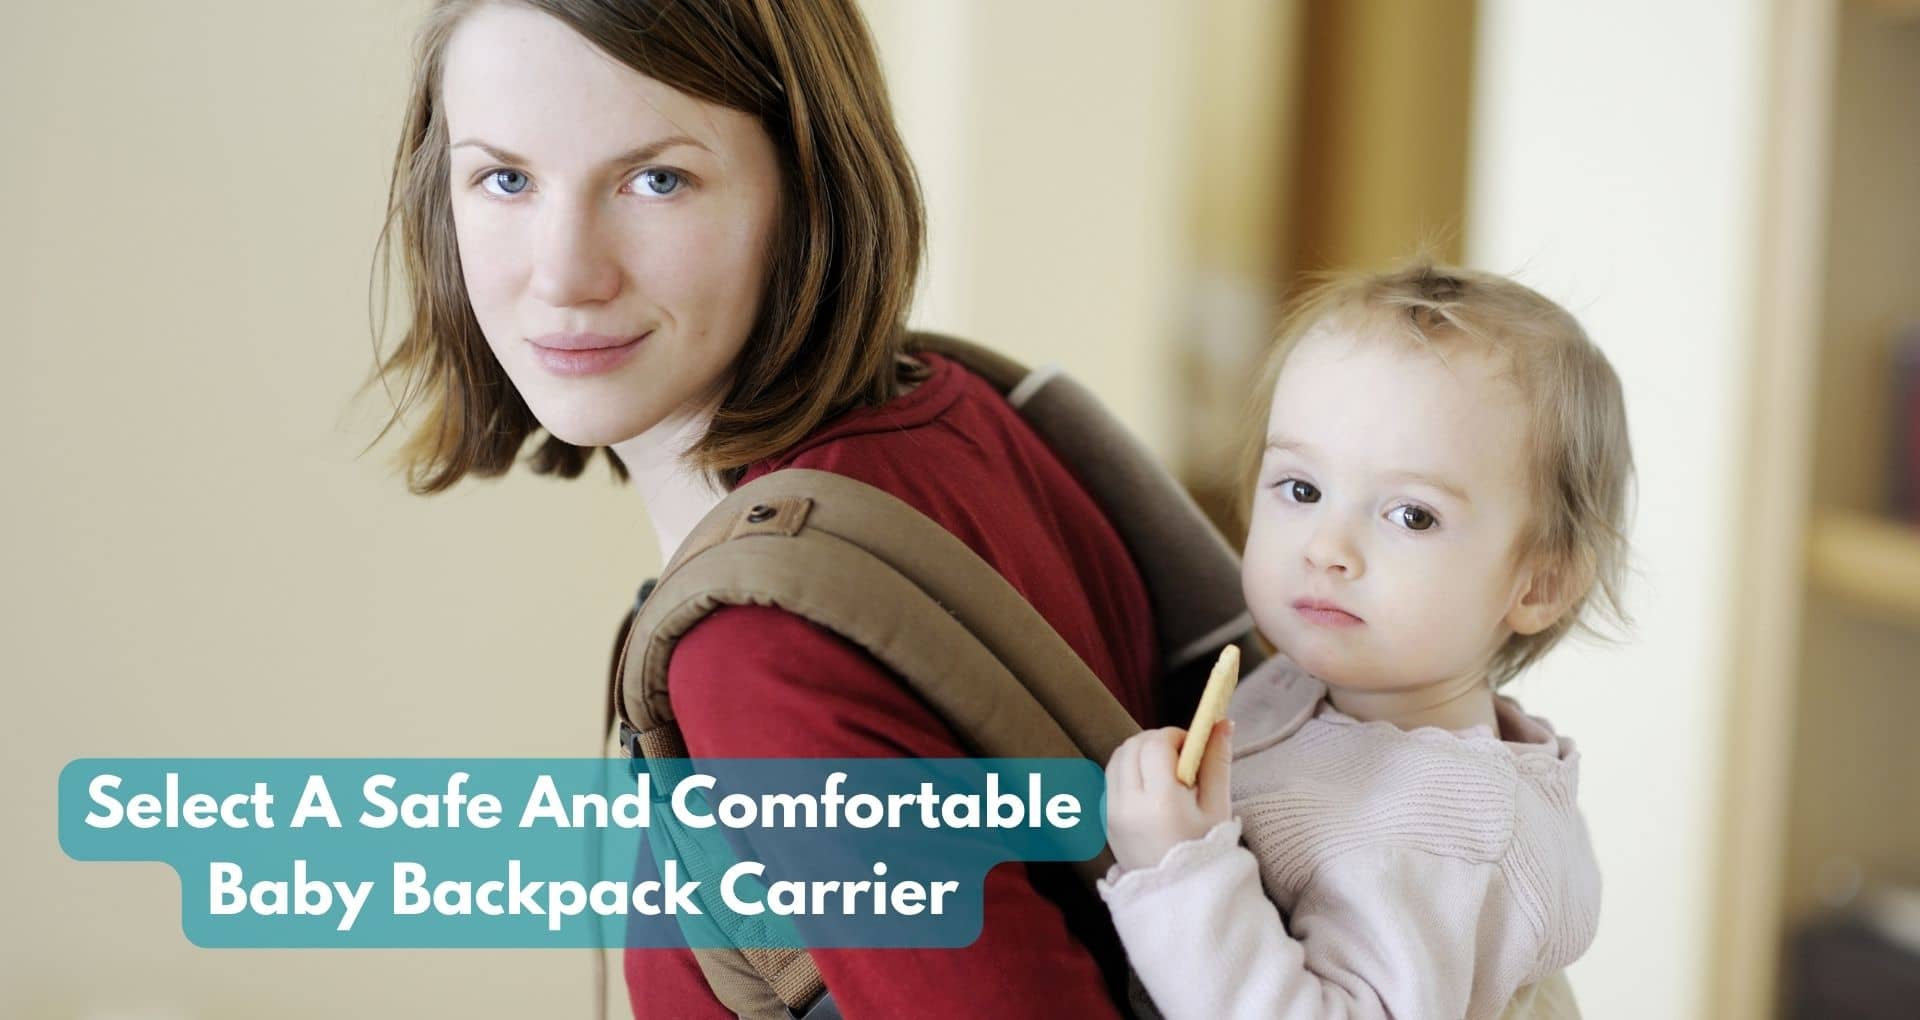 How Do I Select A Safe And Comfortable Baby Backpack Carrier?